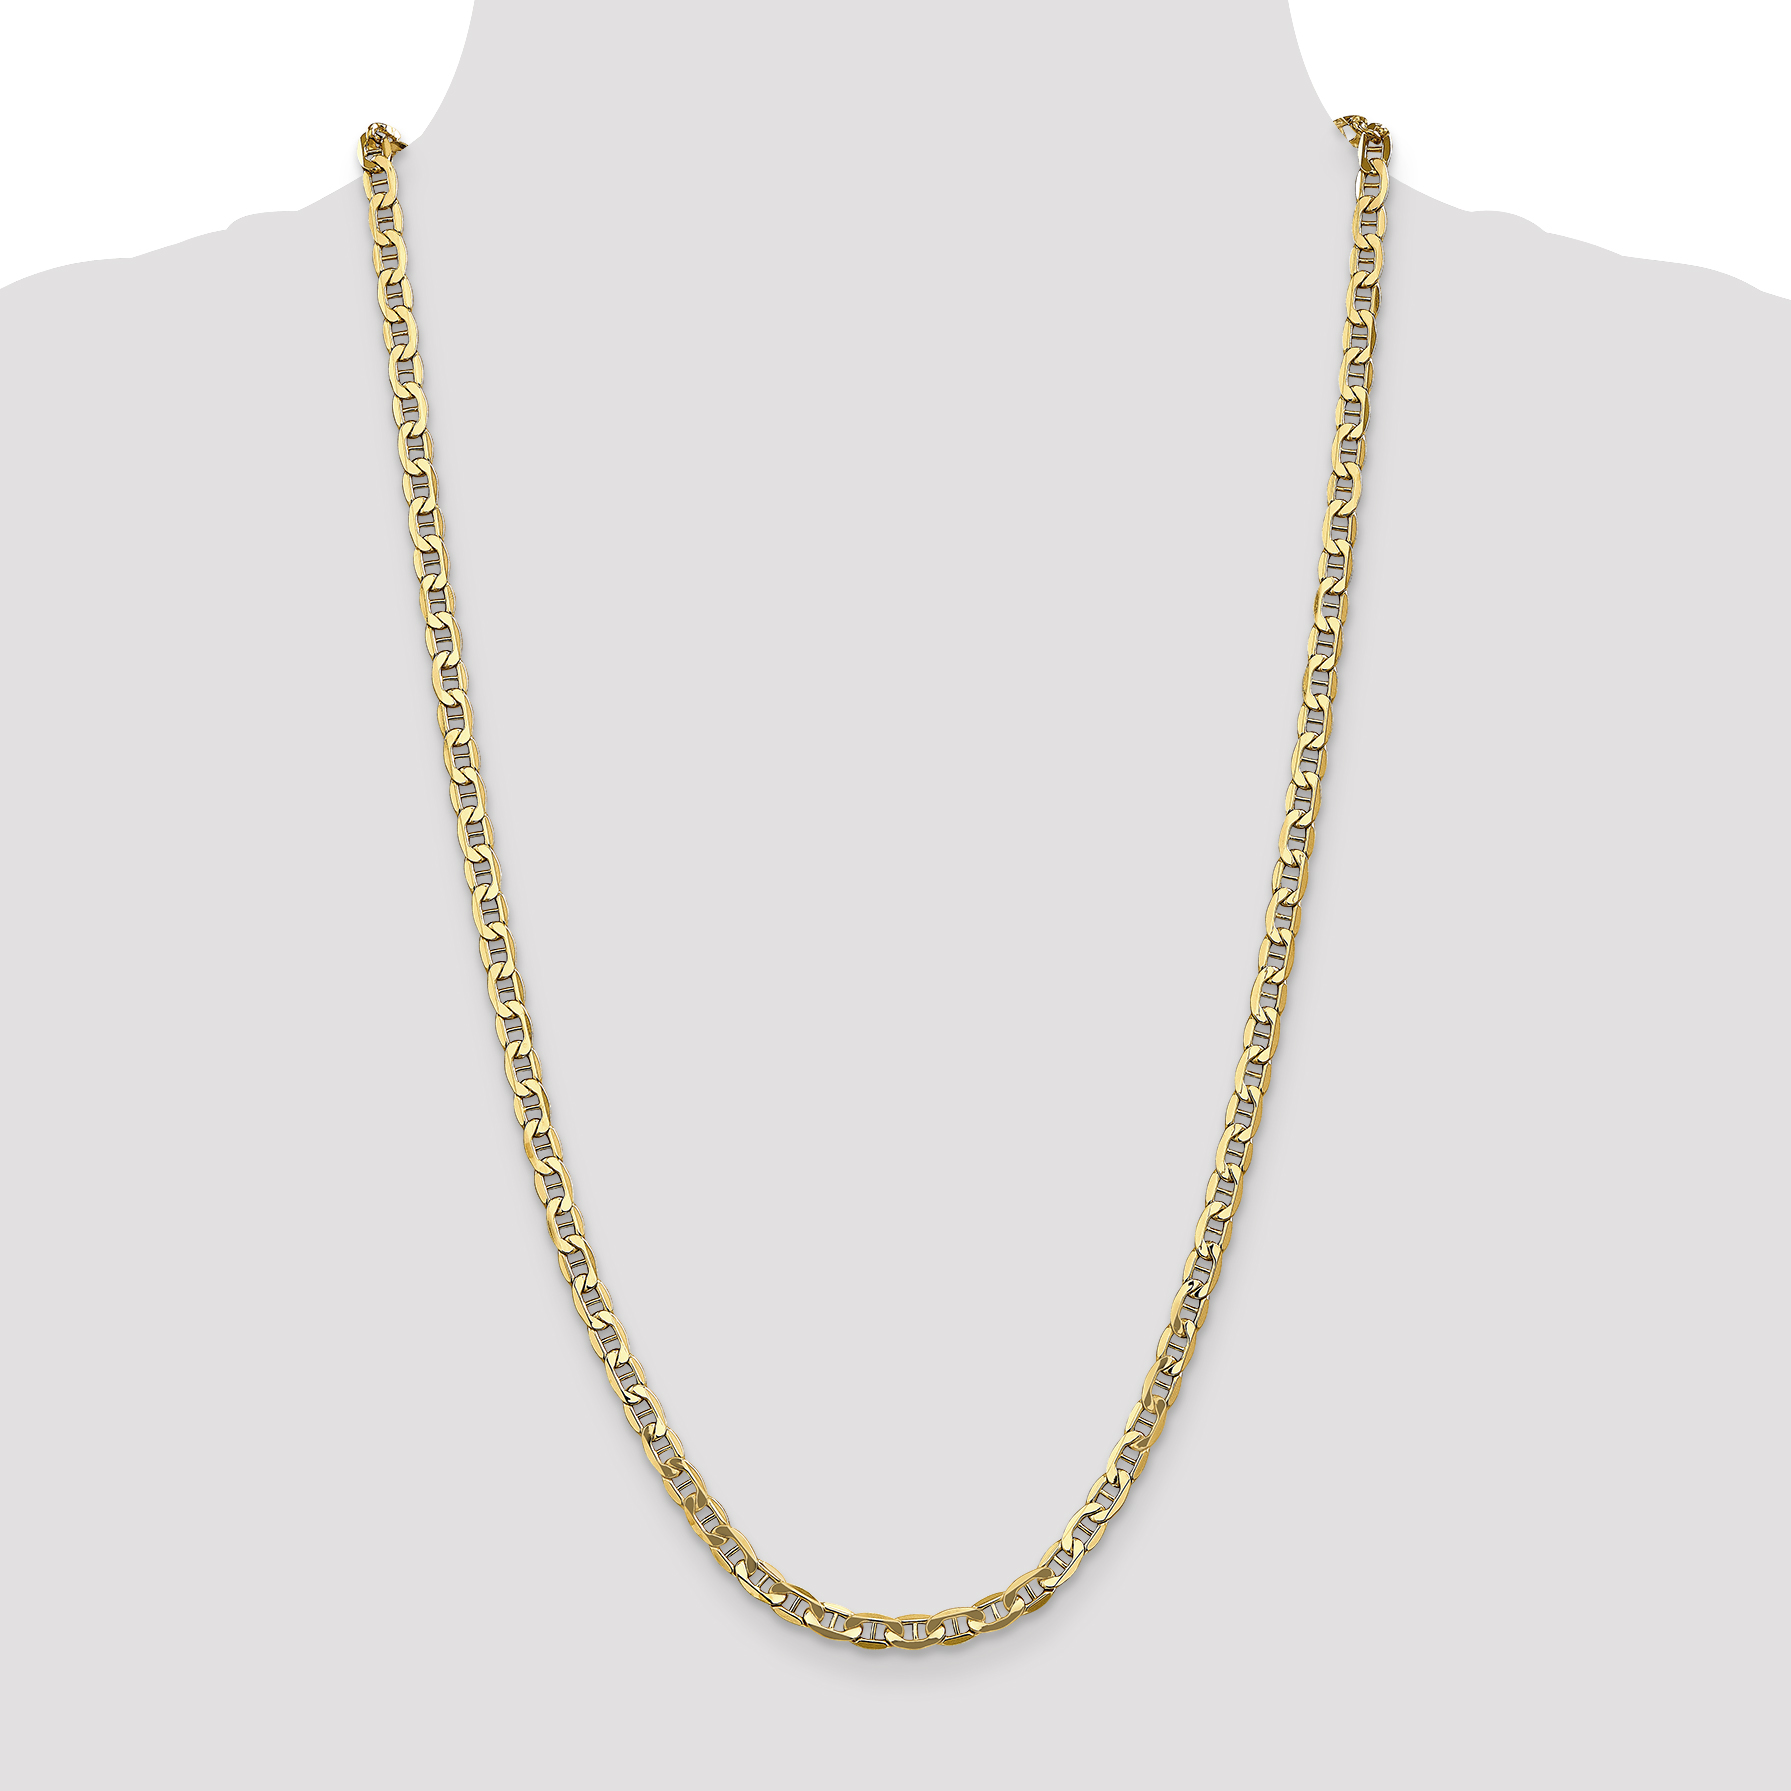 Primal Gold 14 Karat Yellow Gold 4.75mm Semi-Solid Anchor Chain - image 3 of 7